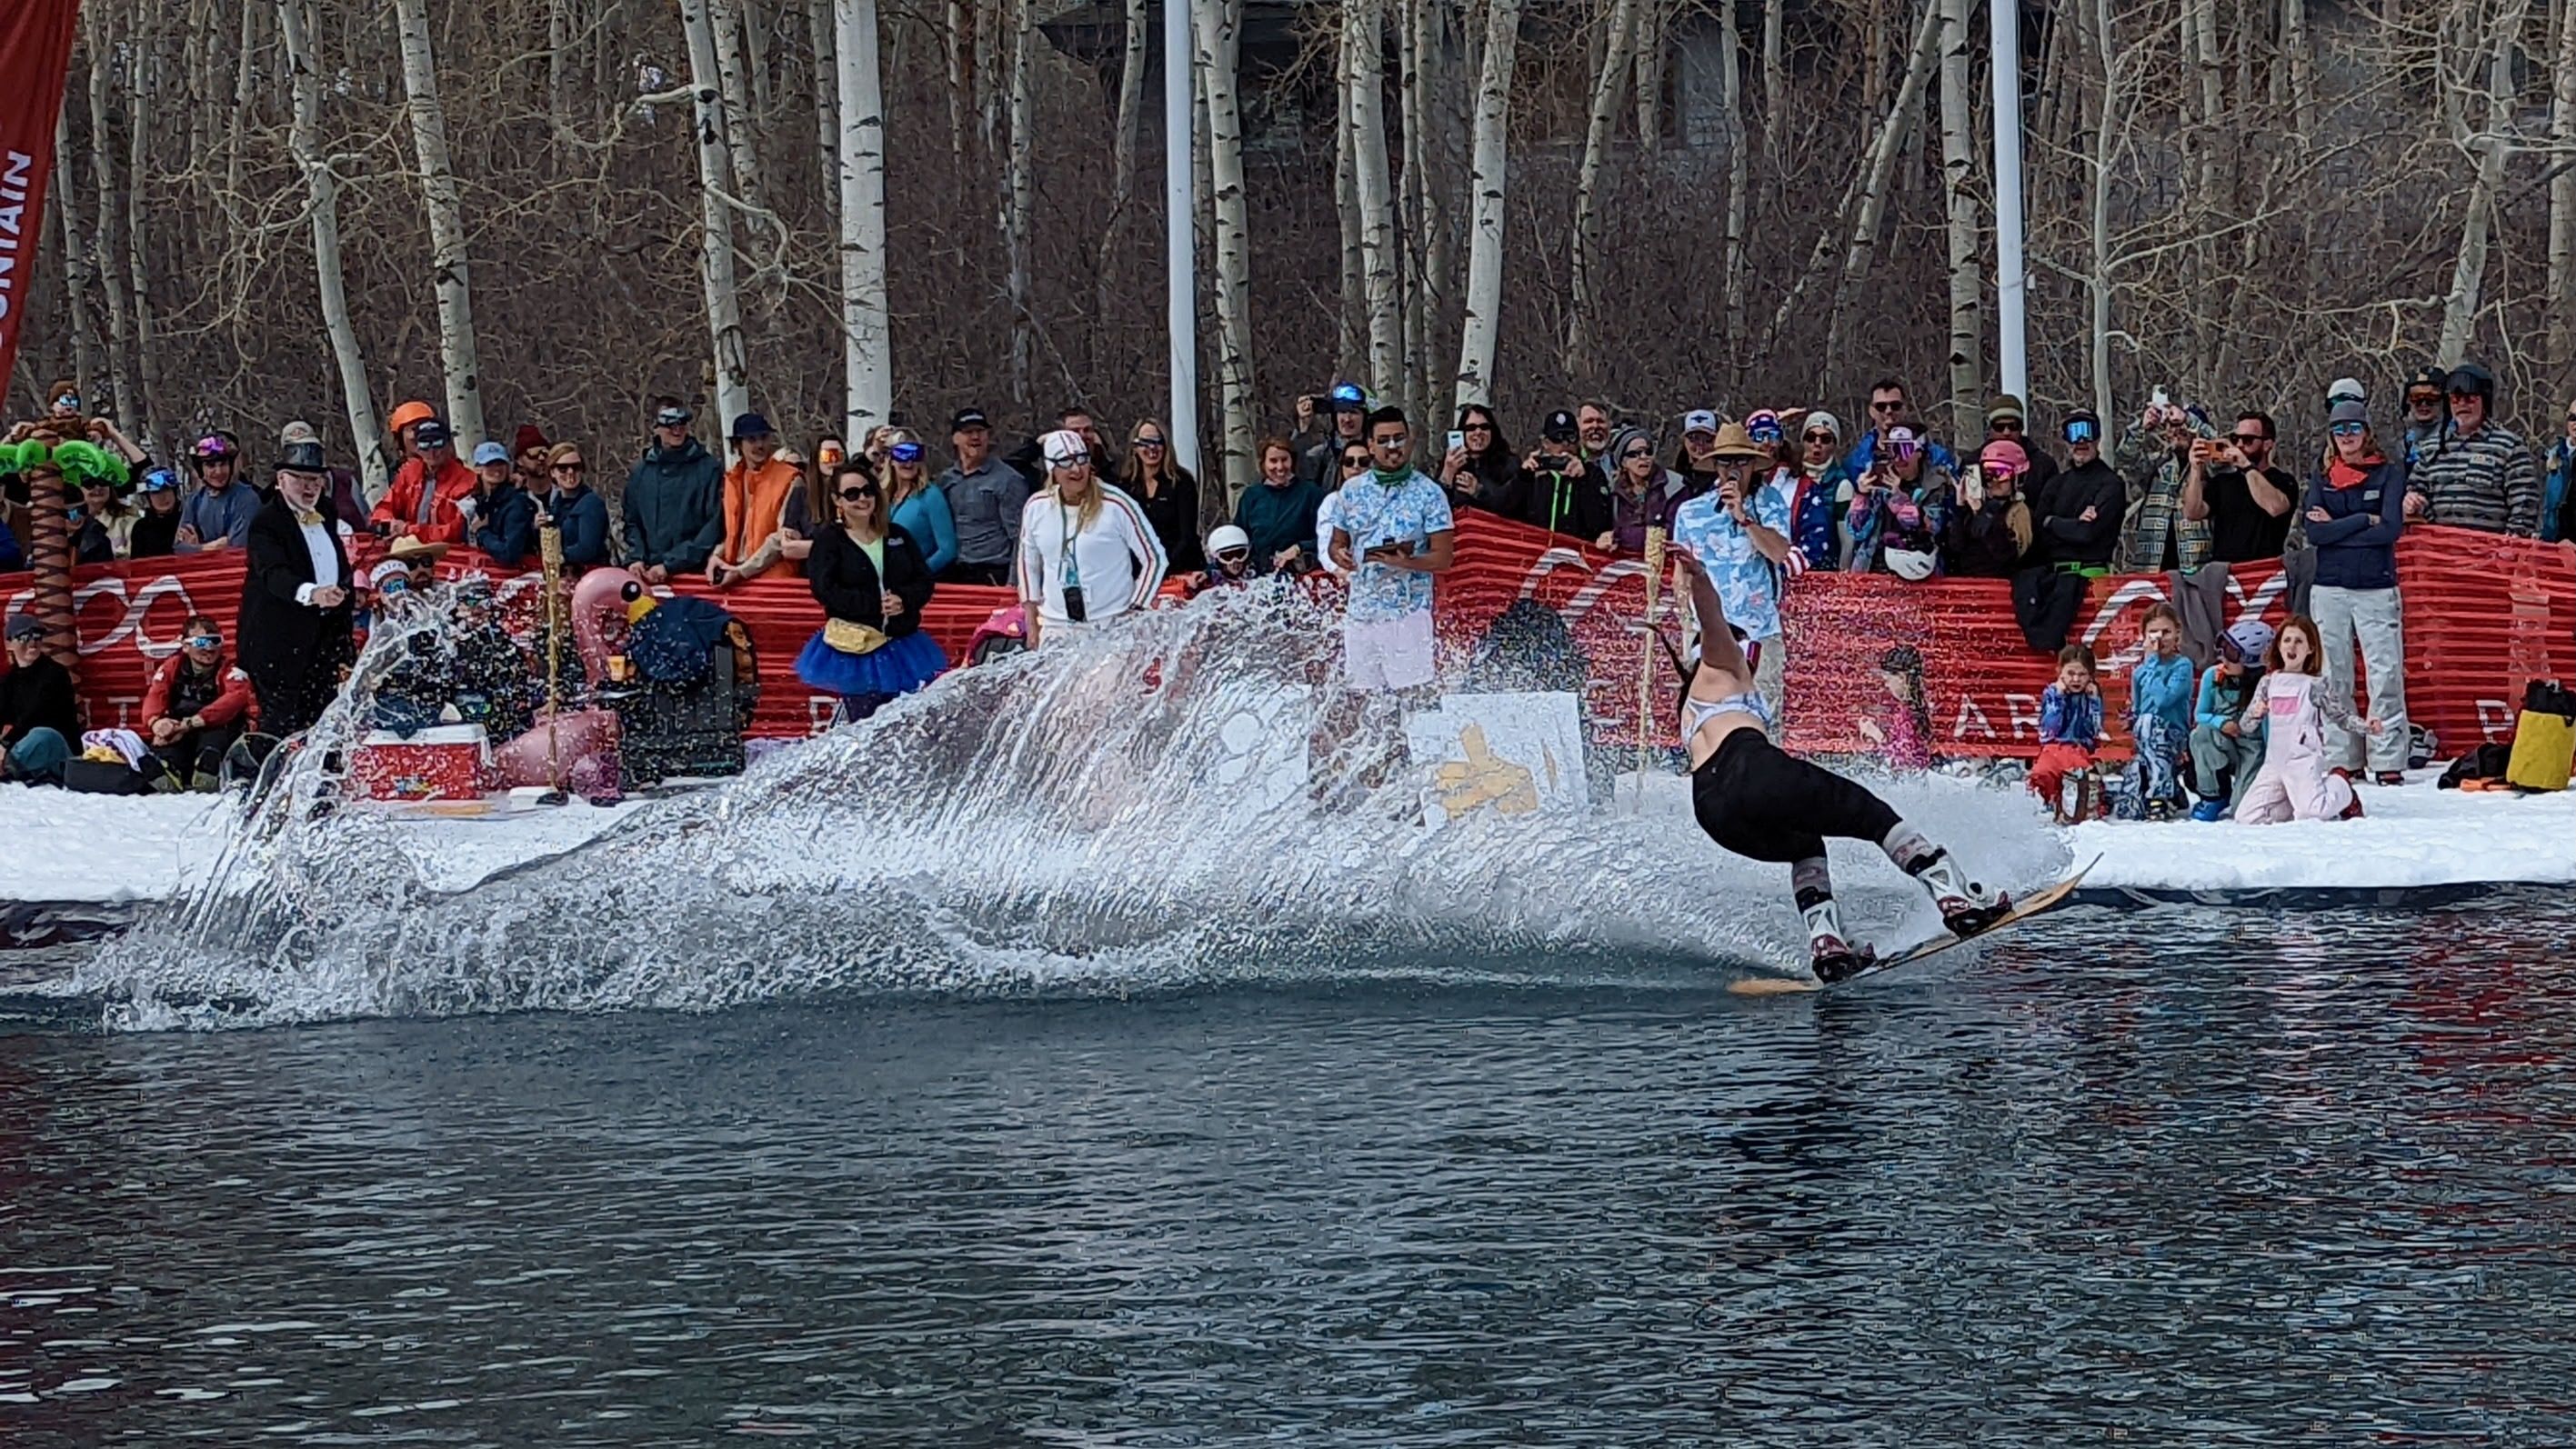 A woman makes a wave as she snowboards onto a pond.